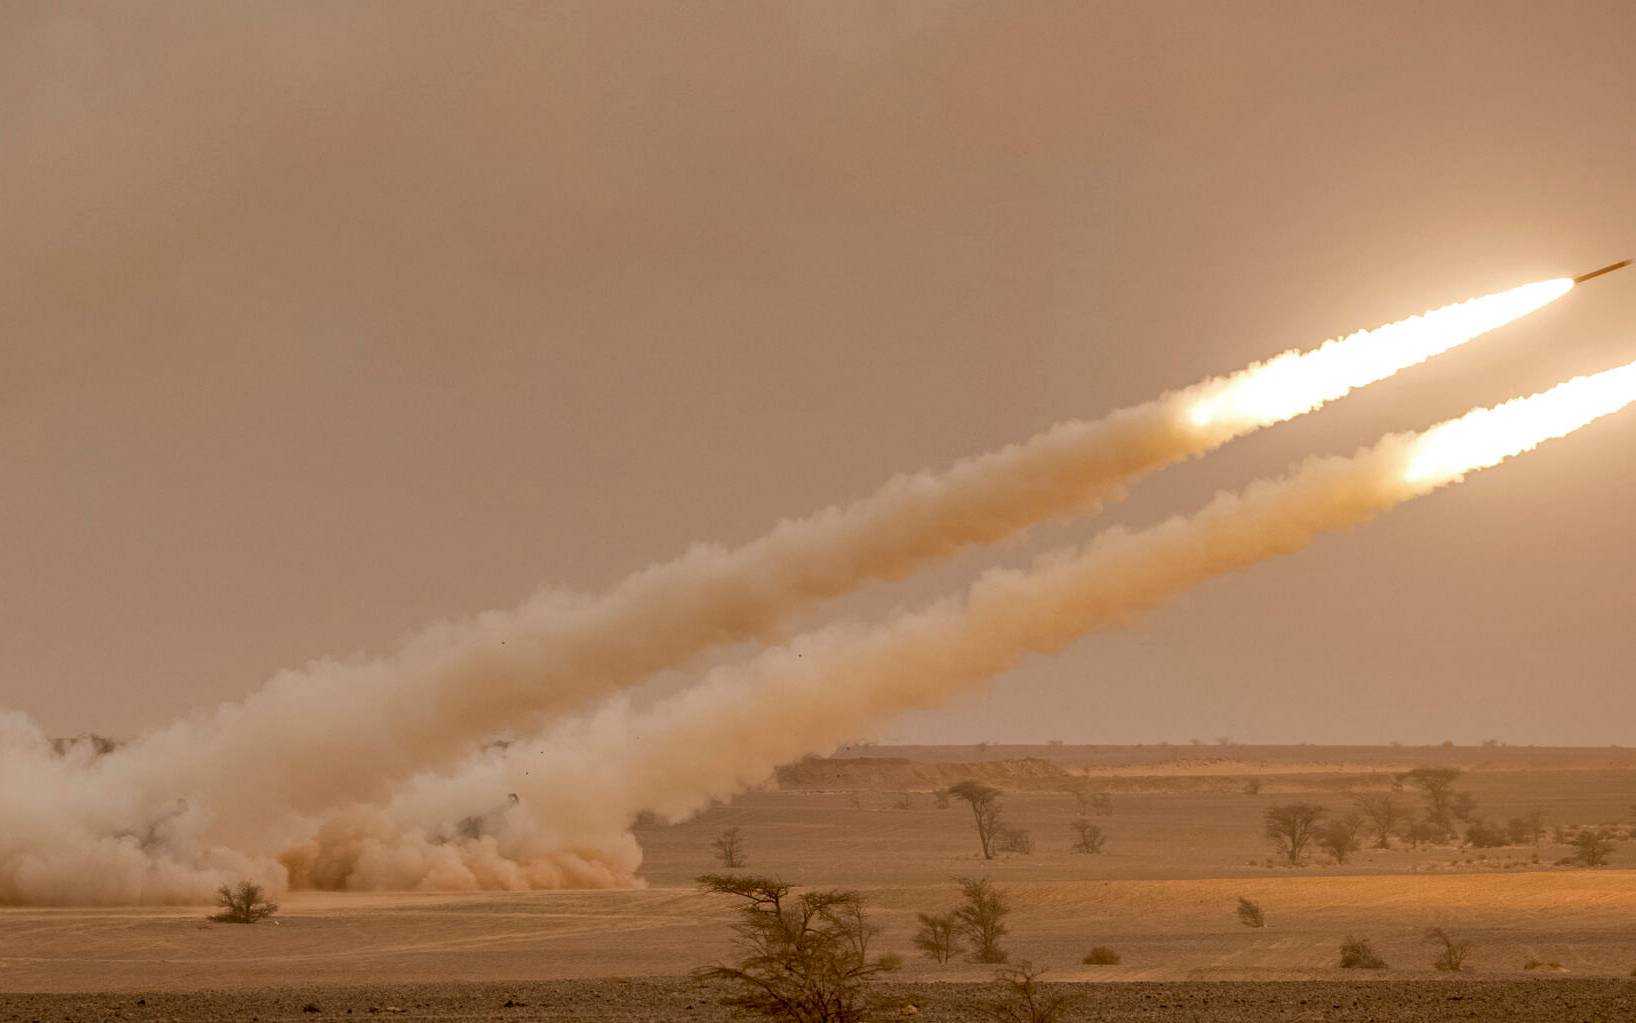 (FILES) In this file photo taken on June 09, 2021 US M142 High Mobility Artillery Rocket System (HIMARS) launchers fire salvoes during the "African Lion" military exercise in the Grier Labouihi region in southeastern Morocco. - The United States is sending Himars advanced multiple rocket systems to Ukraine, a US official said May 31, 2022, ending days of speculation over the latest upgrade of military aid to Kyiv in its fight against Russia.The Himars use precision-guided munitions, the official, who spoke on condition of anonymity, told reporters. The range is about 50 miles (80 kilometers), with Washington deciding against sending munitions with a far longer range. (Photo by FADEL SENNA / AFP)